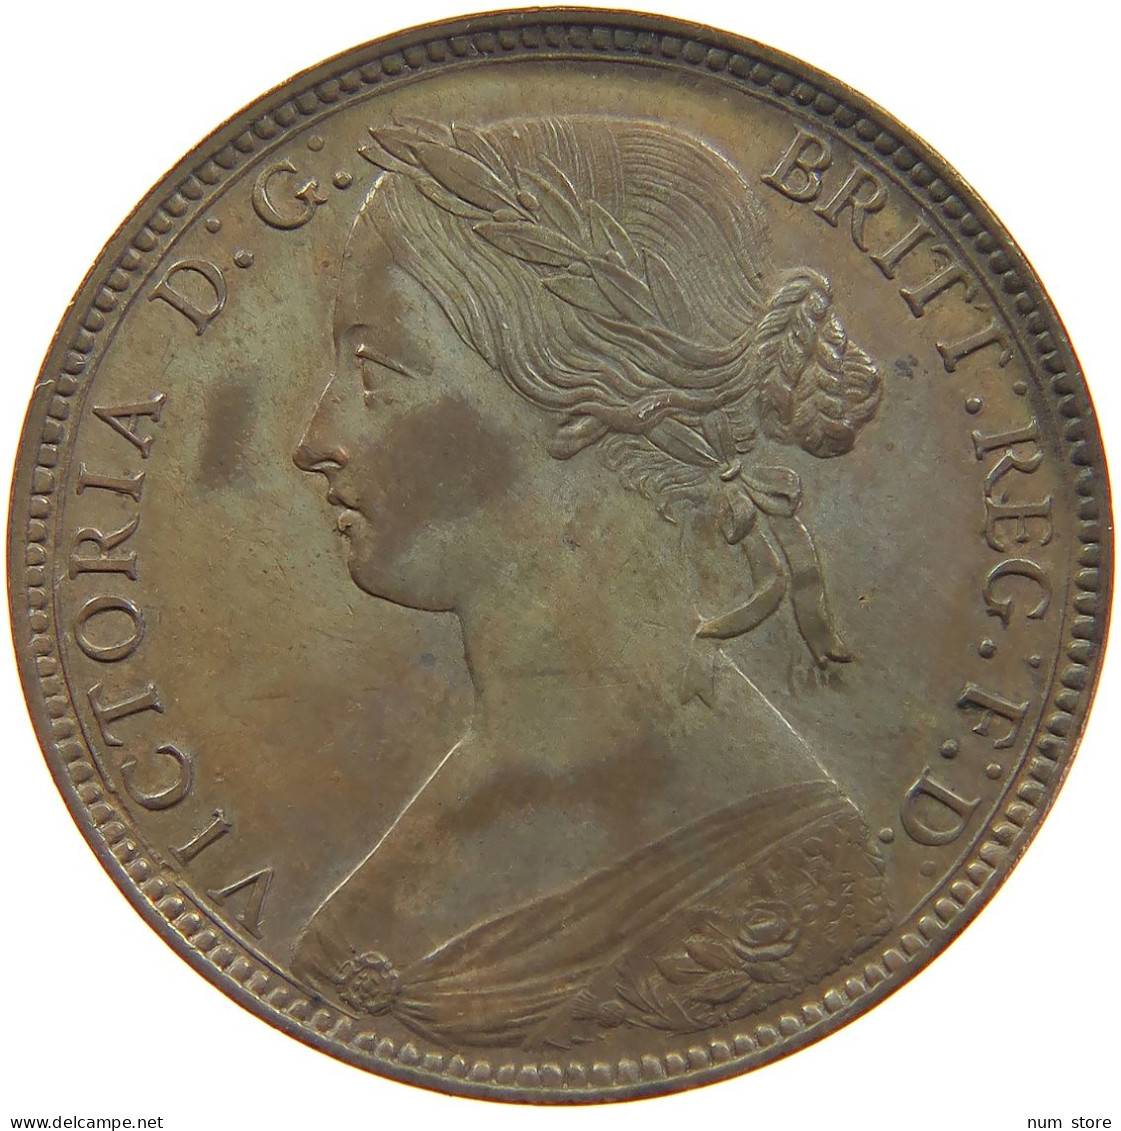 GREAT BRITAIN PENNY 1860 Victoria 1837-1901 SHINNY FIELDS #t138 0015 - D. 1 Penny